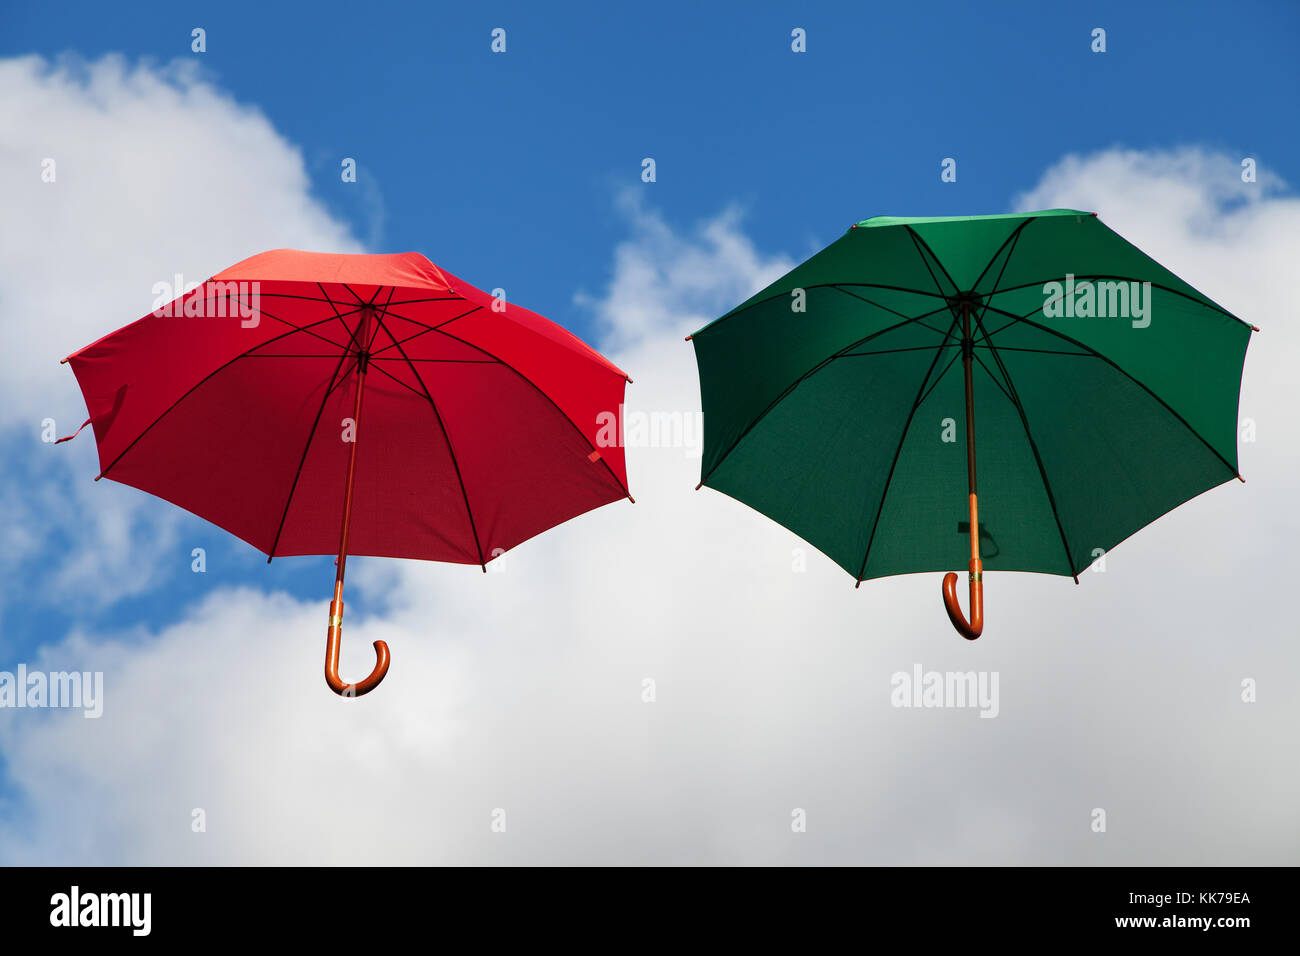 Two Floating Umbrellas in Red and Green Stock Photo